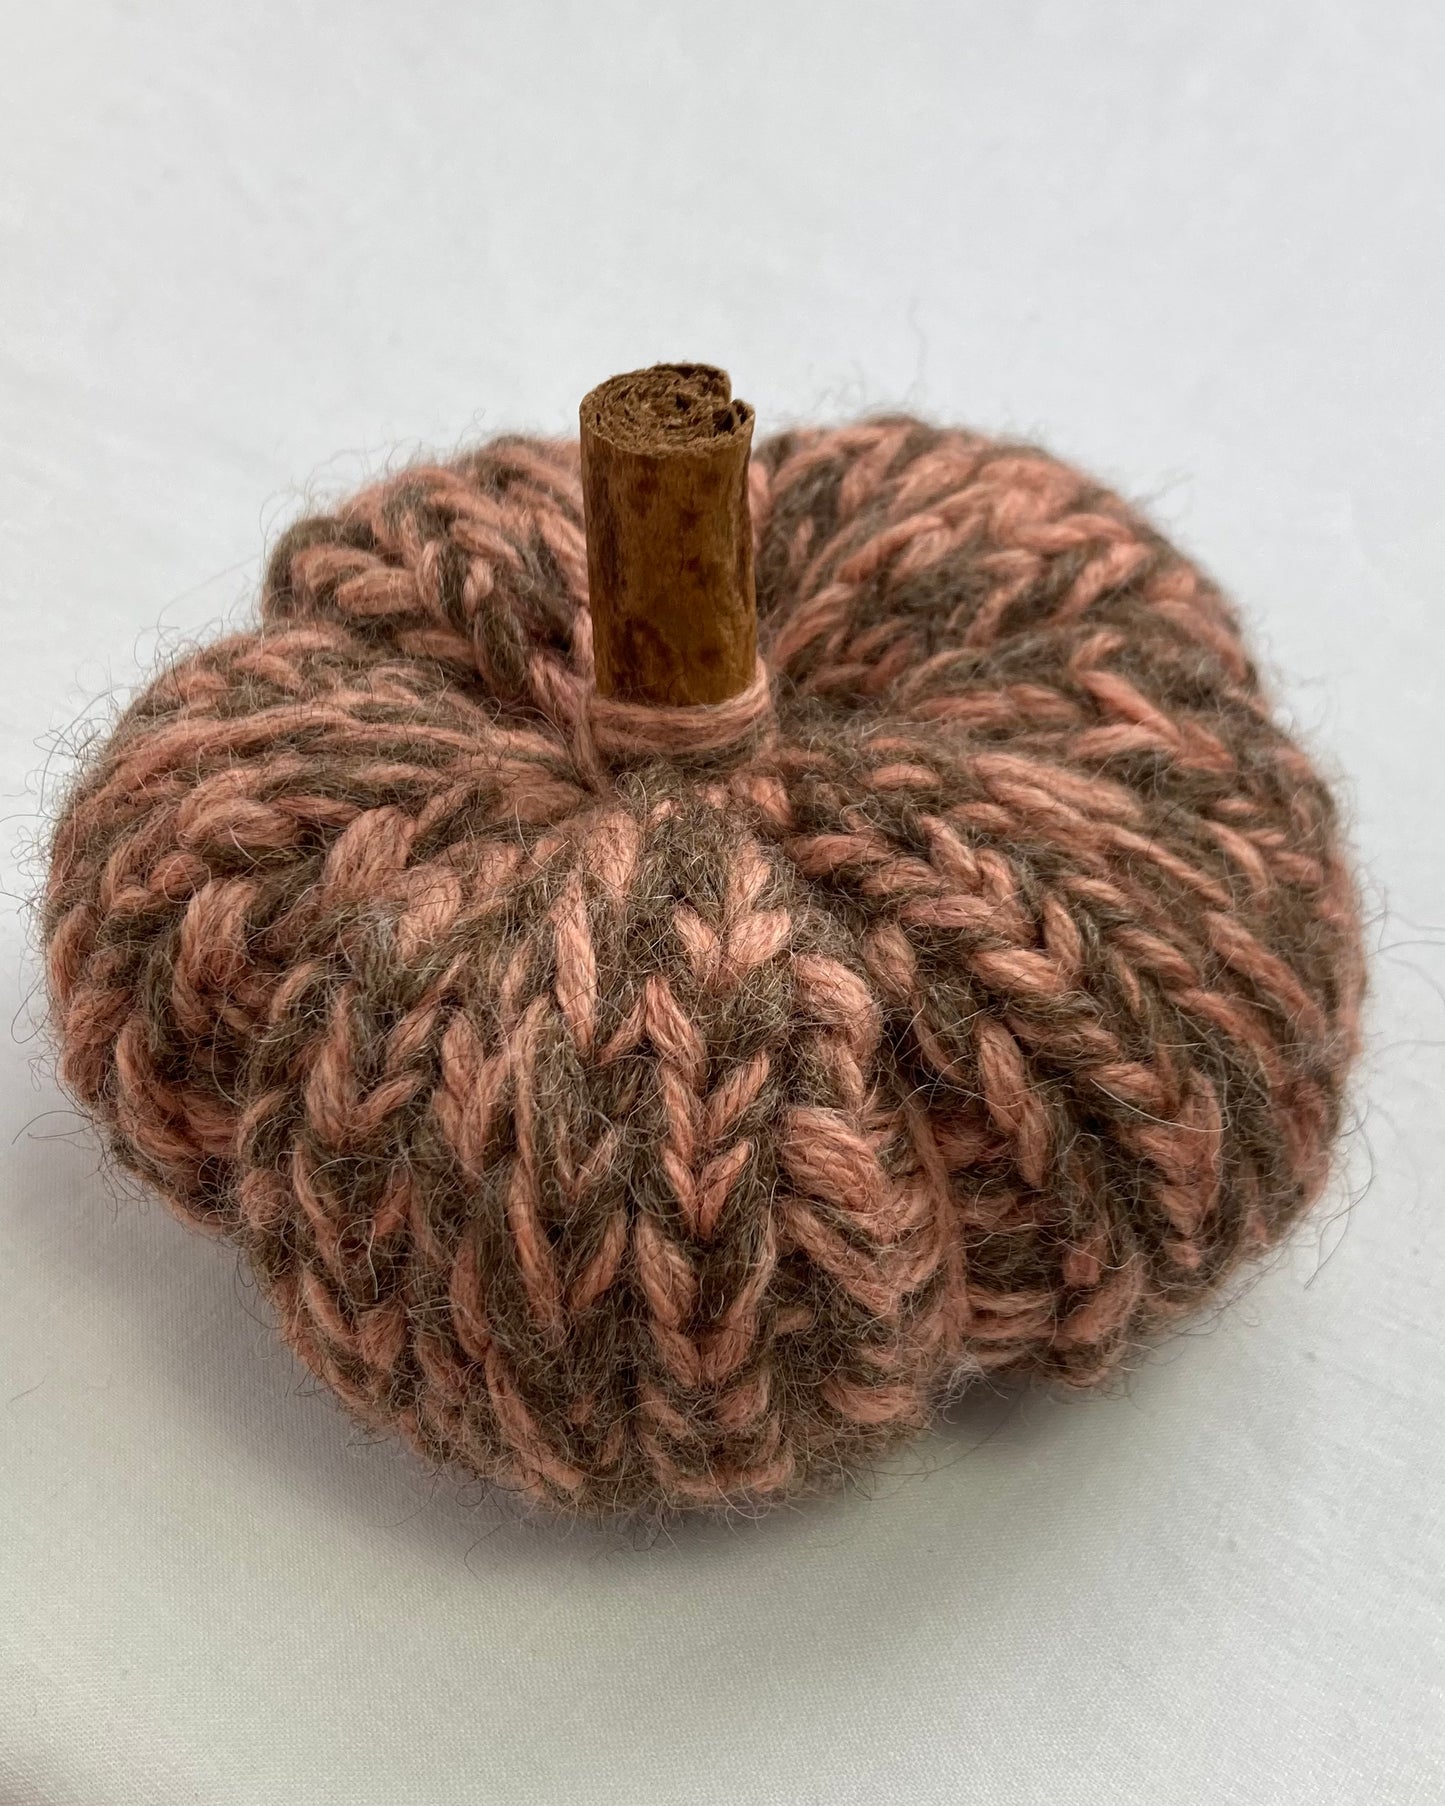 Plant-Dyed Knitted Pumpkin